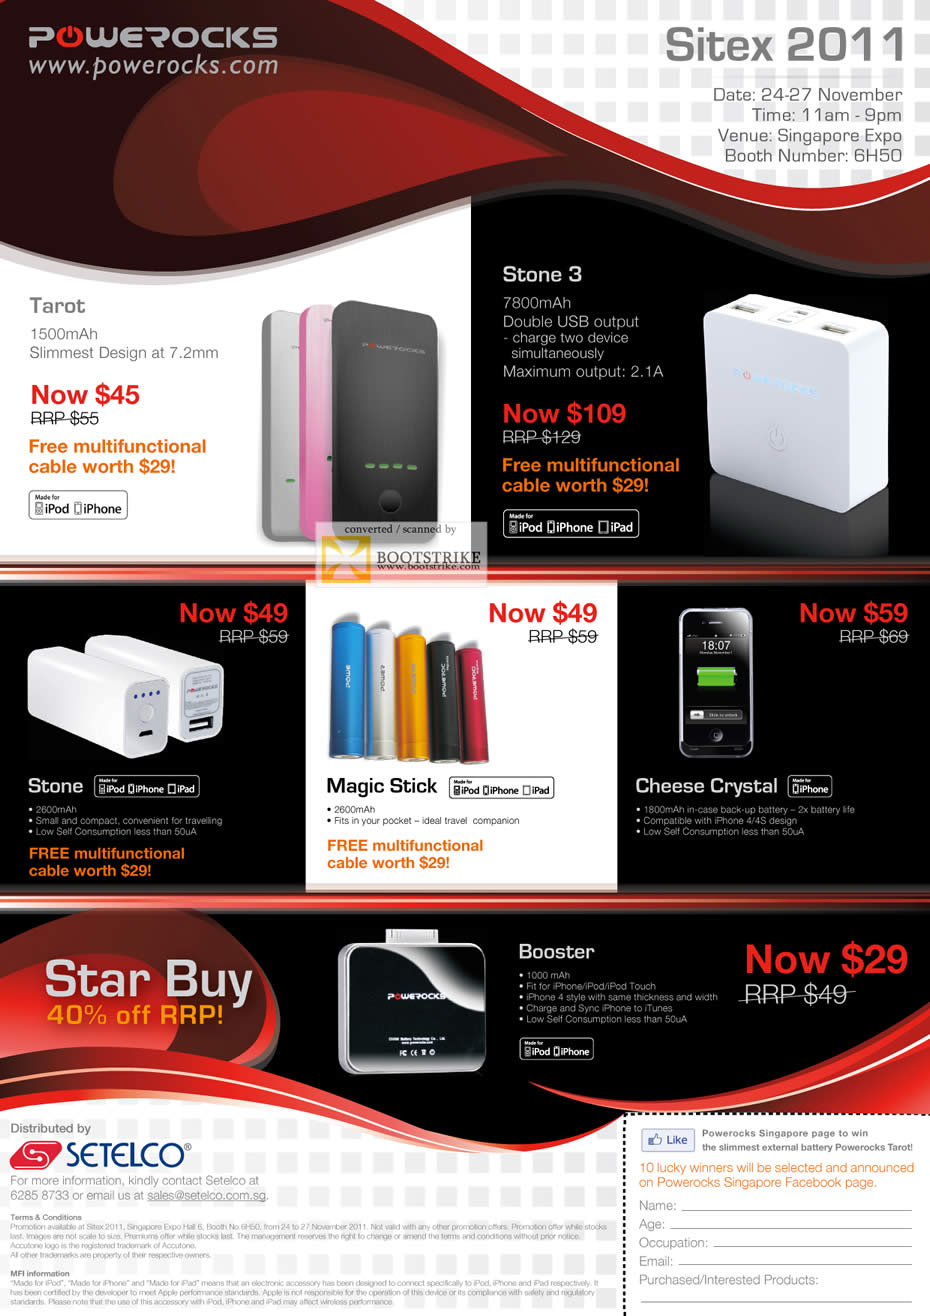 SITEX 2011 price list image brochure of Setelco Powerocks Tarot Portable Charger, Stone 3, Stone, Magic Stick, Cheese Crystal, Booster